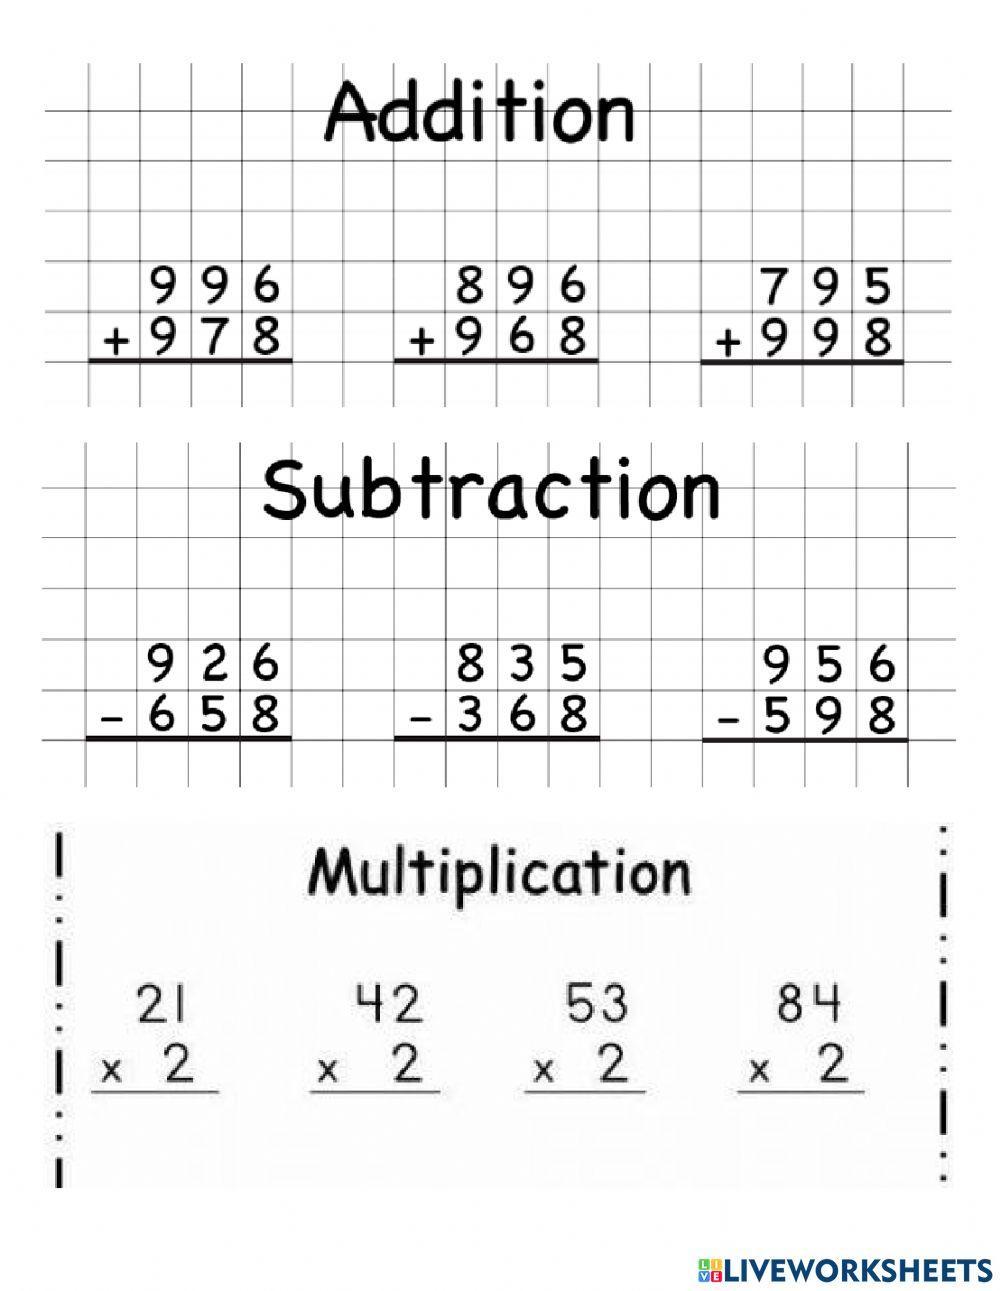 Addition , Subtraction and Multiplication